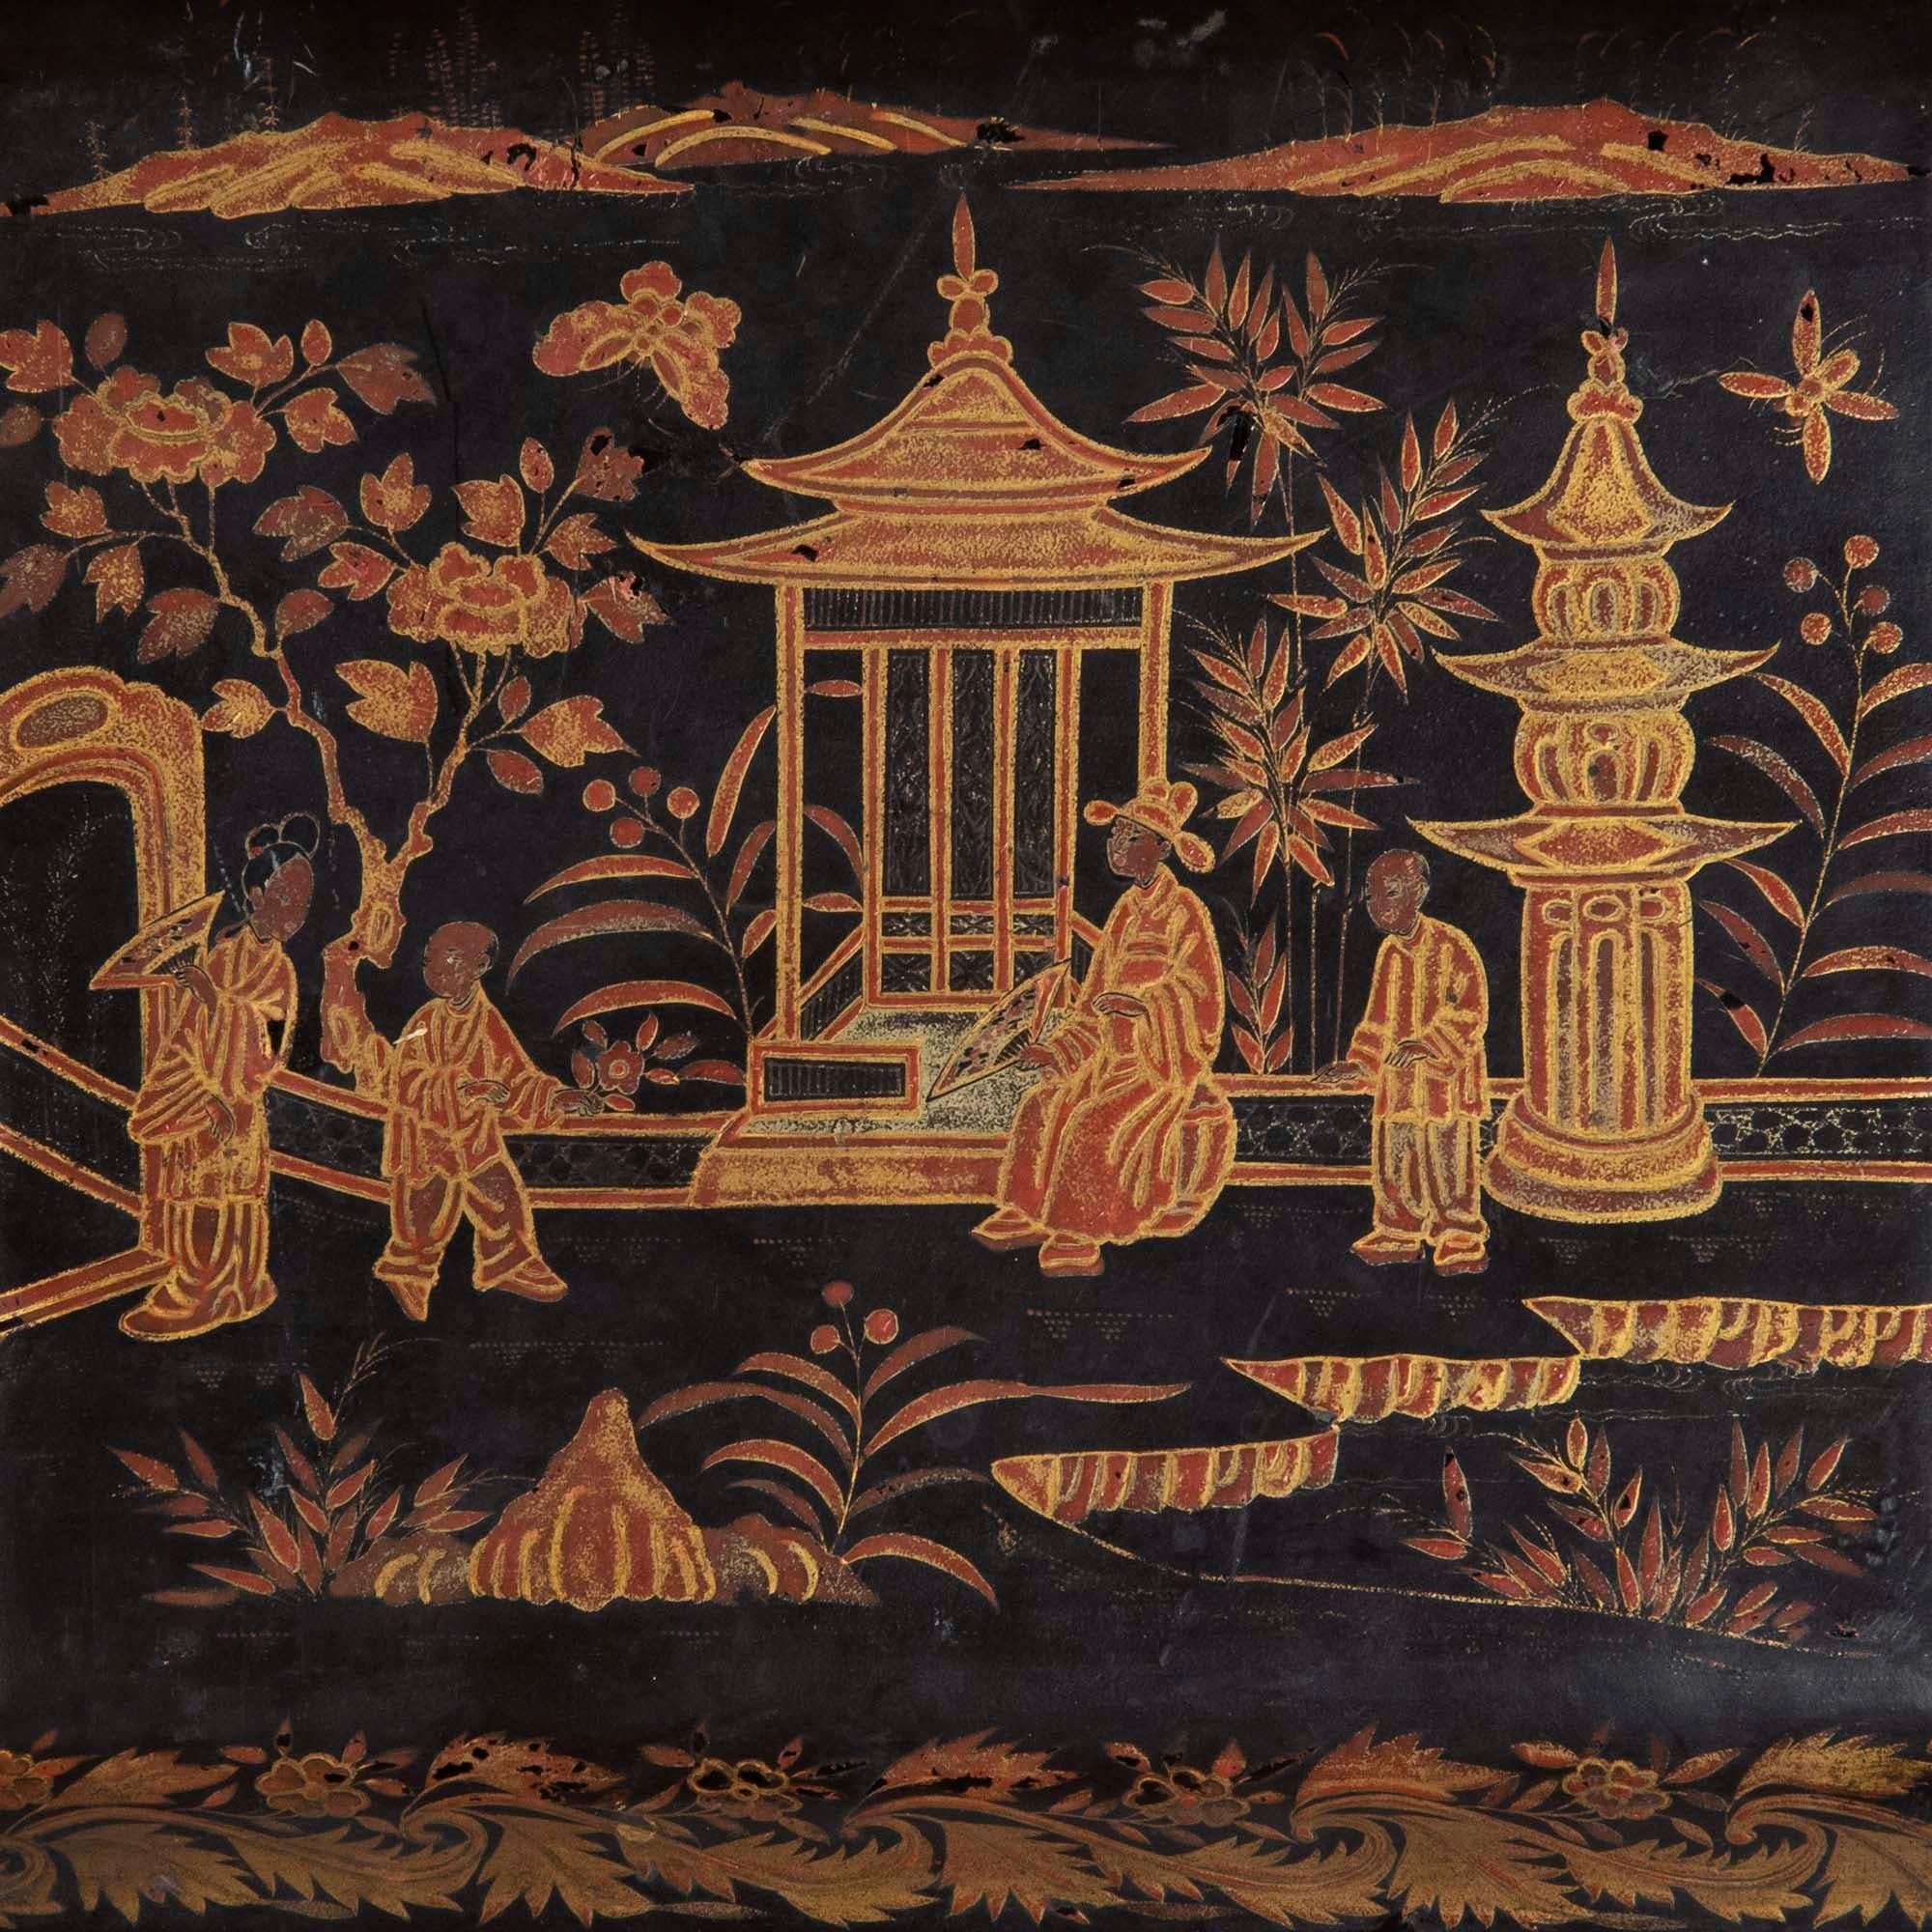 A charming and decorative Chinese export black lacquer box made for the European market and exquisitely gilt-decorated with whimsical oriental motifs of figures in an exotic garden amid pagodas and foliage.
Canton, Qing dynasty, mid-19th